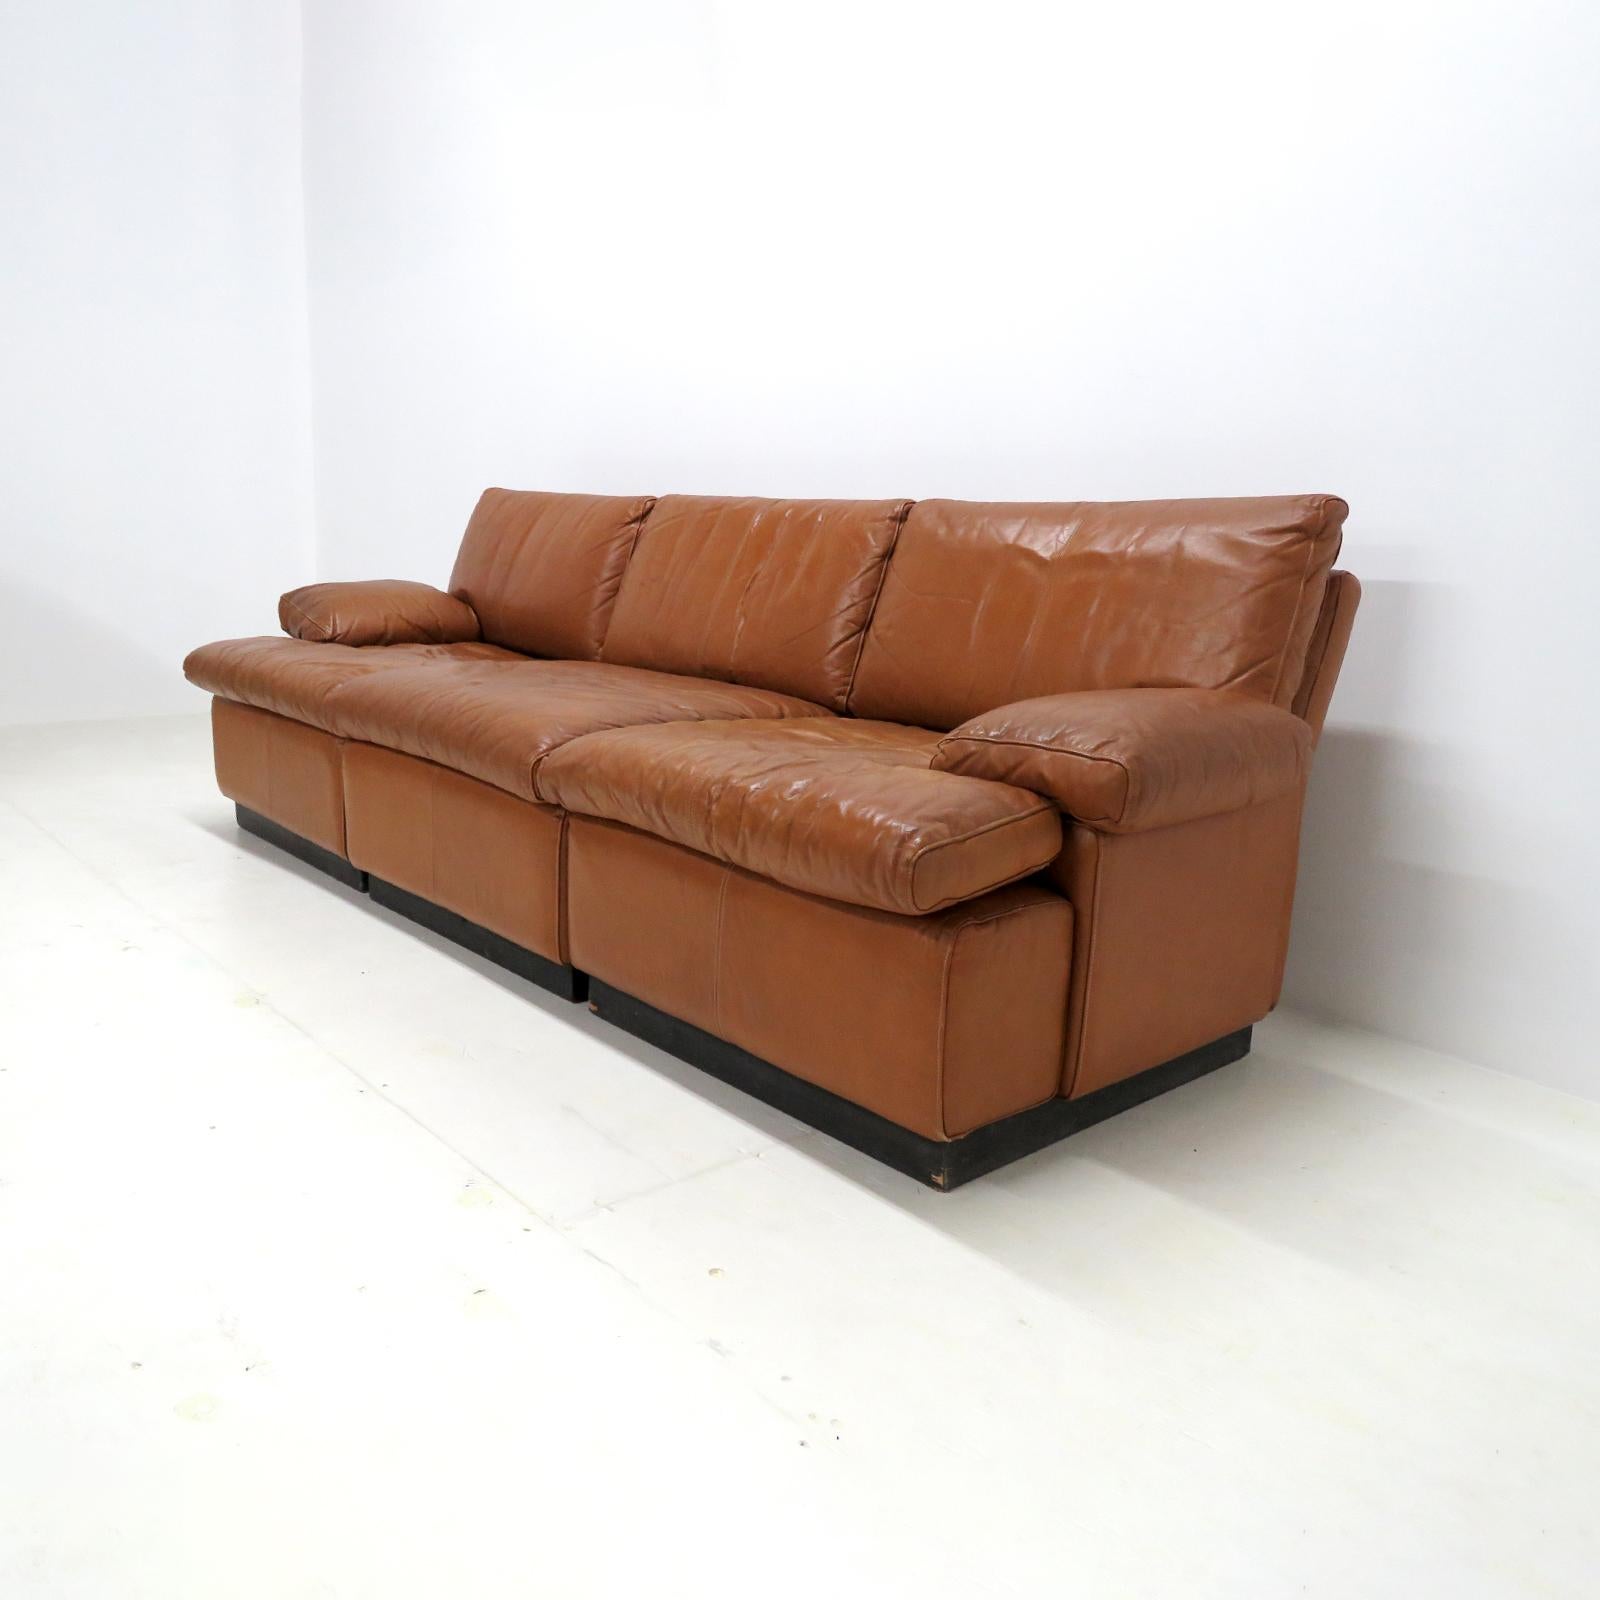 Finnish Modular Leather Sofa by BJ Dahlquist, 1970 In Good Condition For Sale In Los Angeles, CA